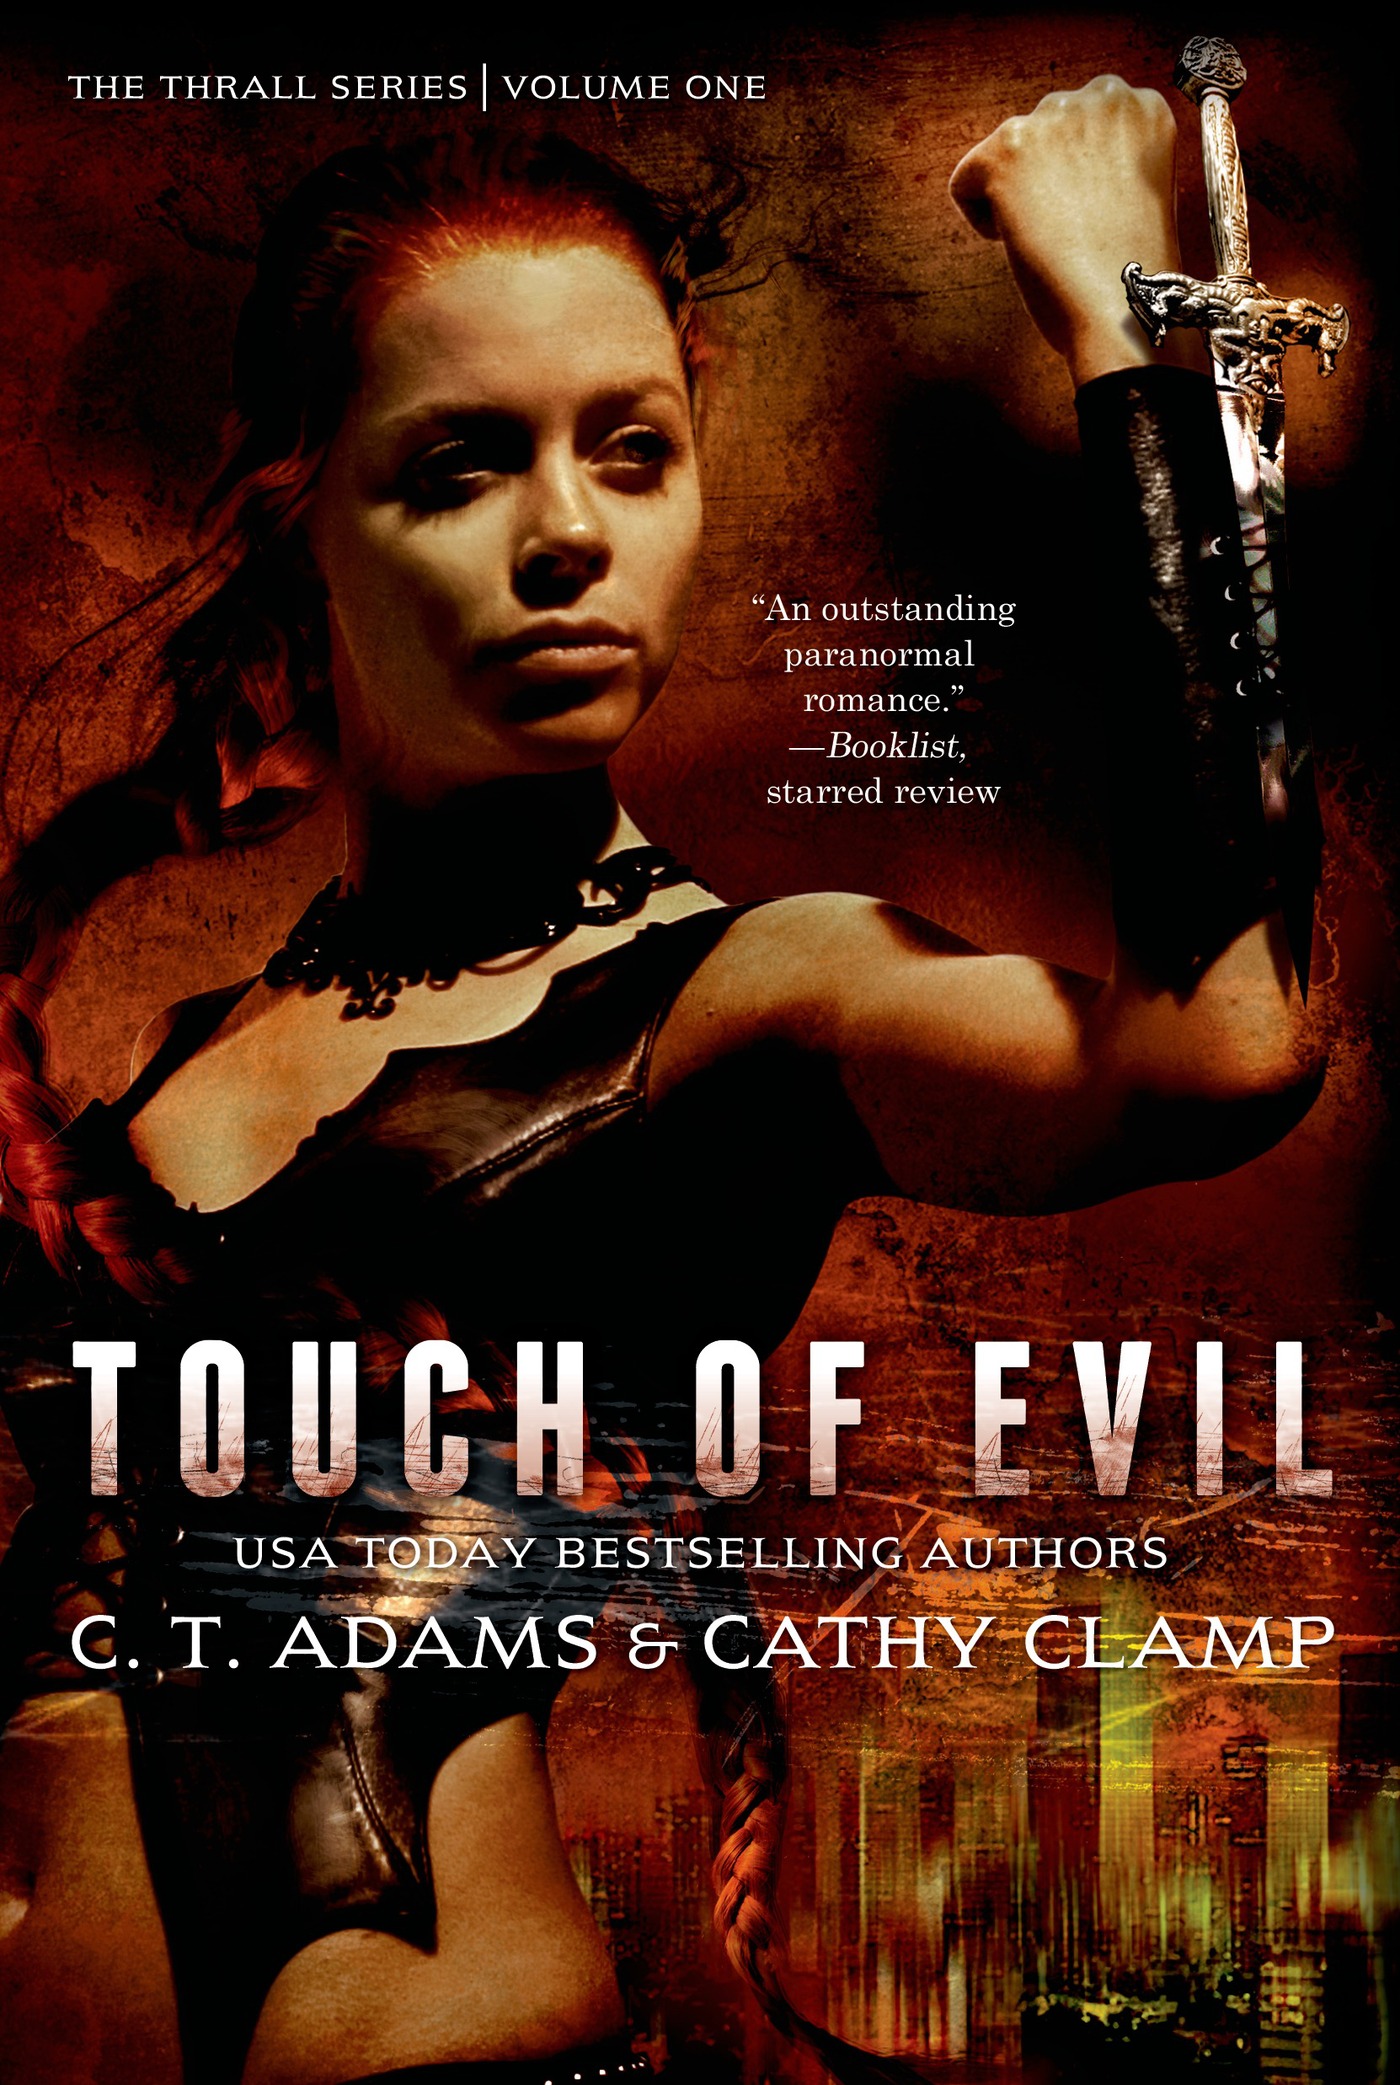 Touch of Evil : The Thrall Series: Volume One by C.T. Adams, Cathy Clamp